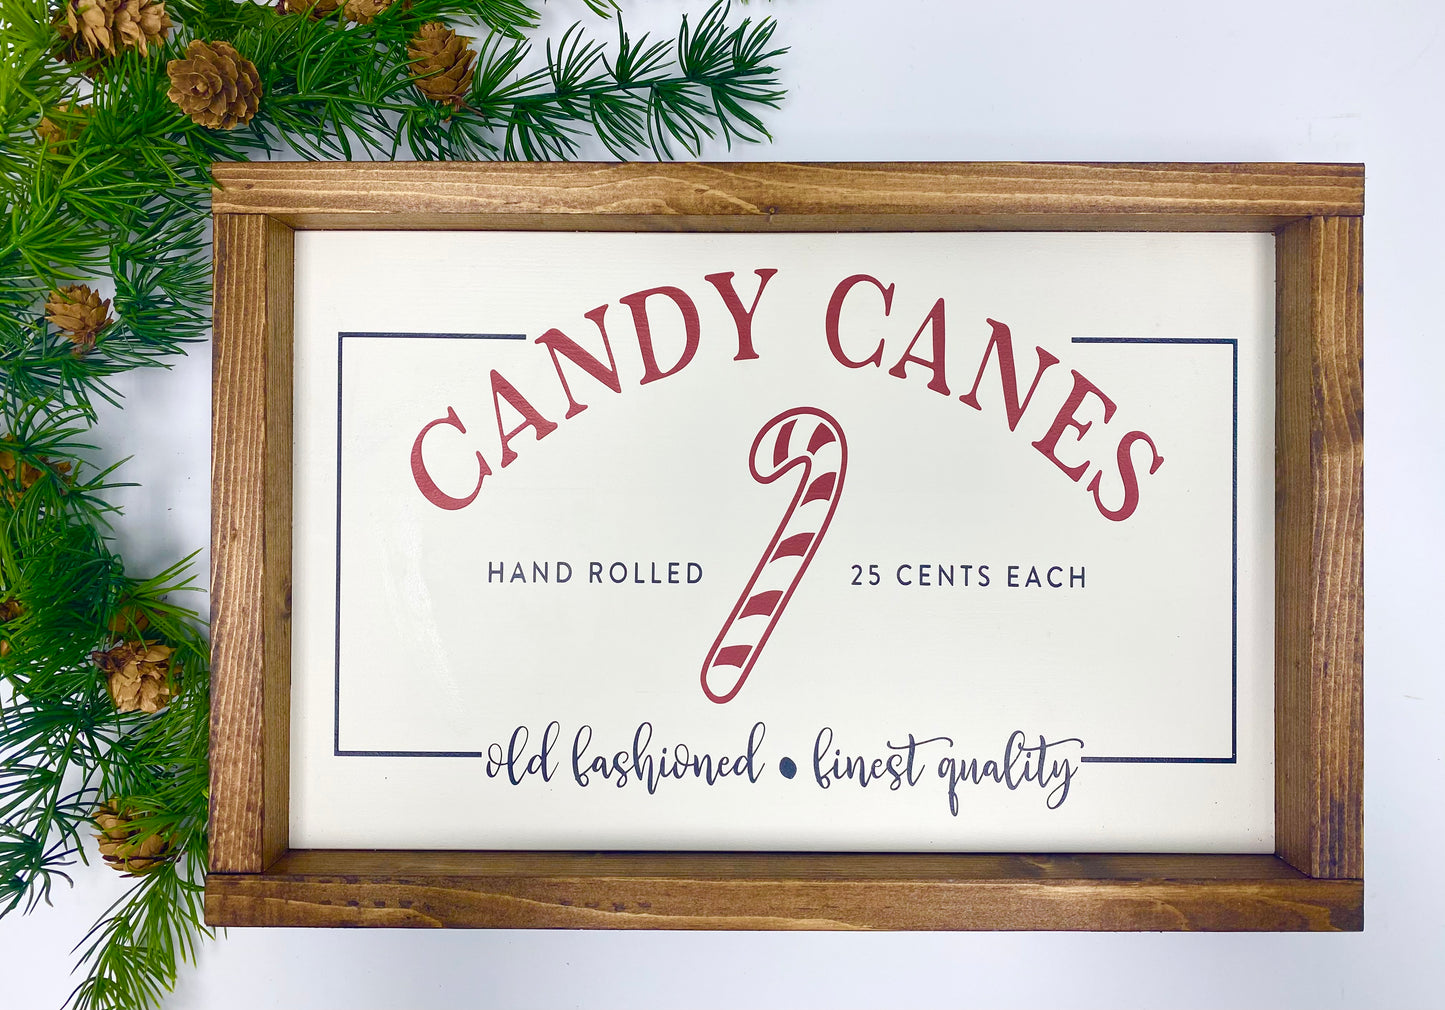 Handmade Signs - Candy Canes